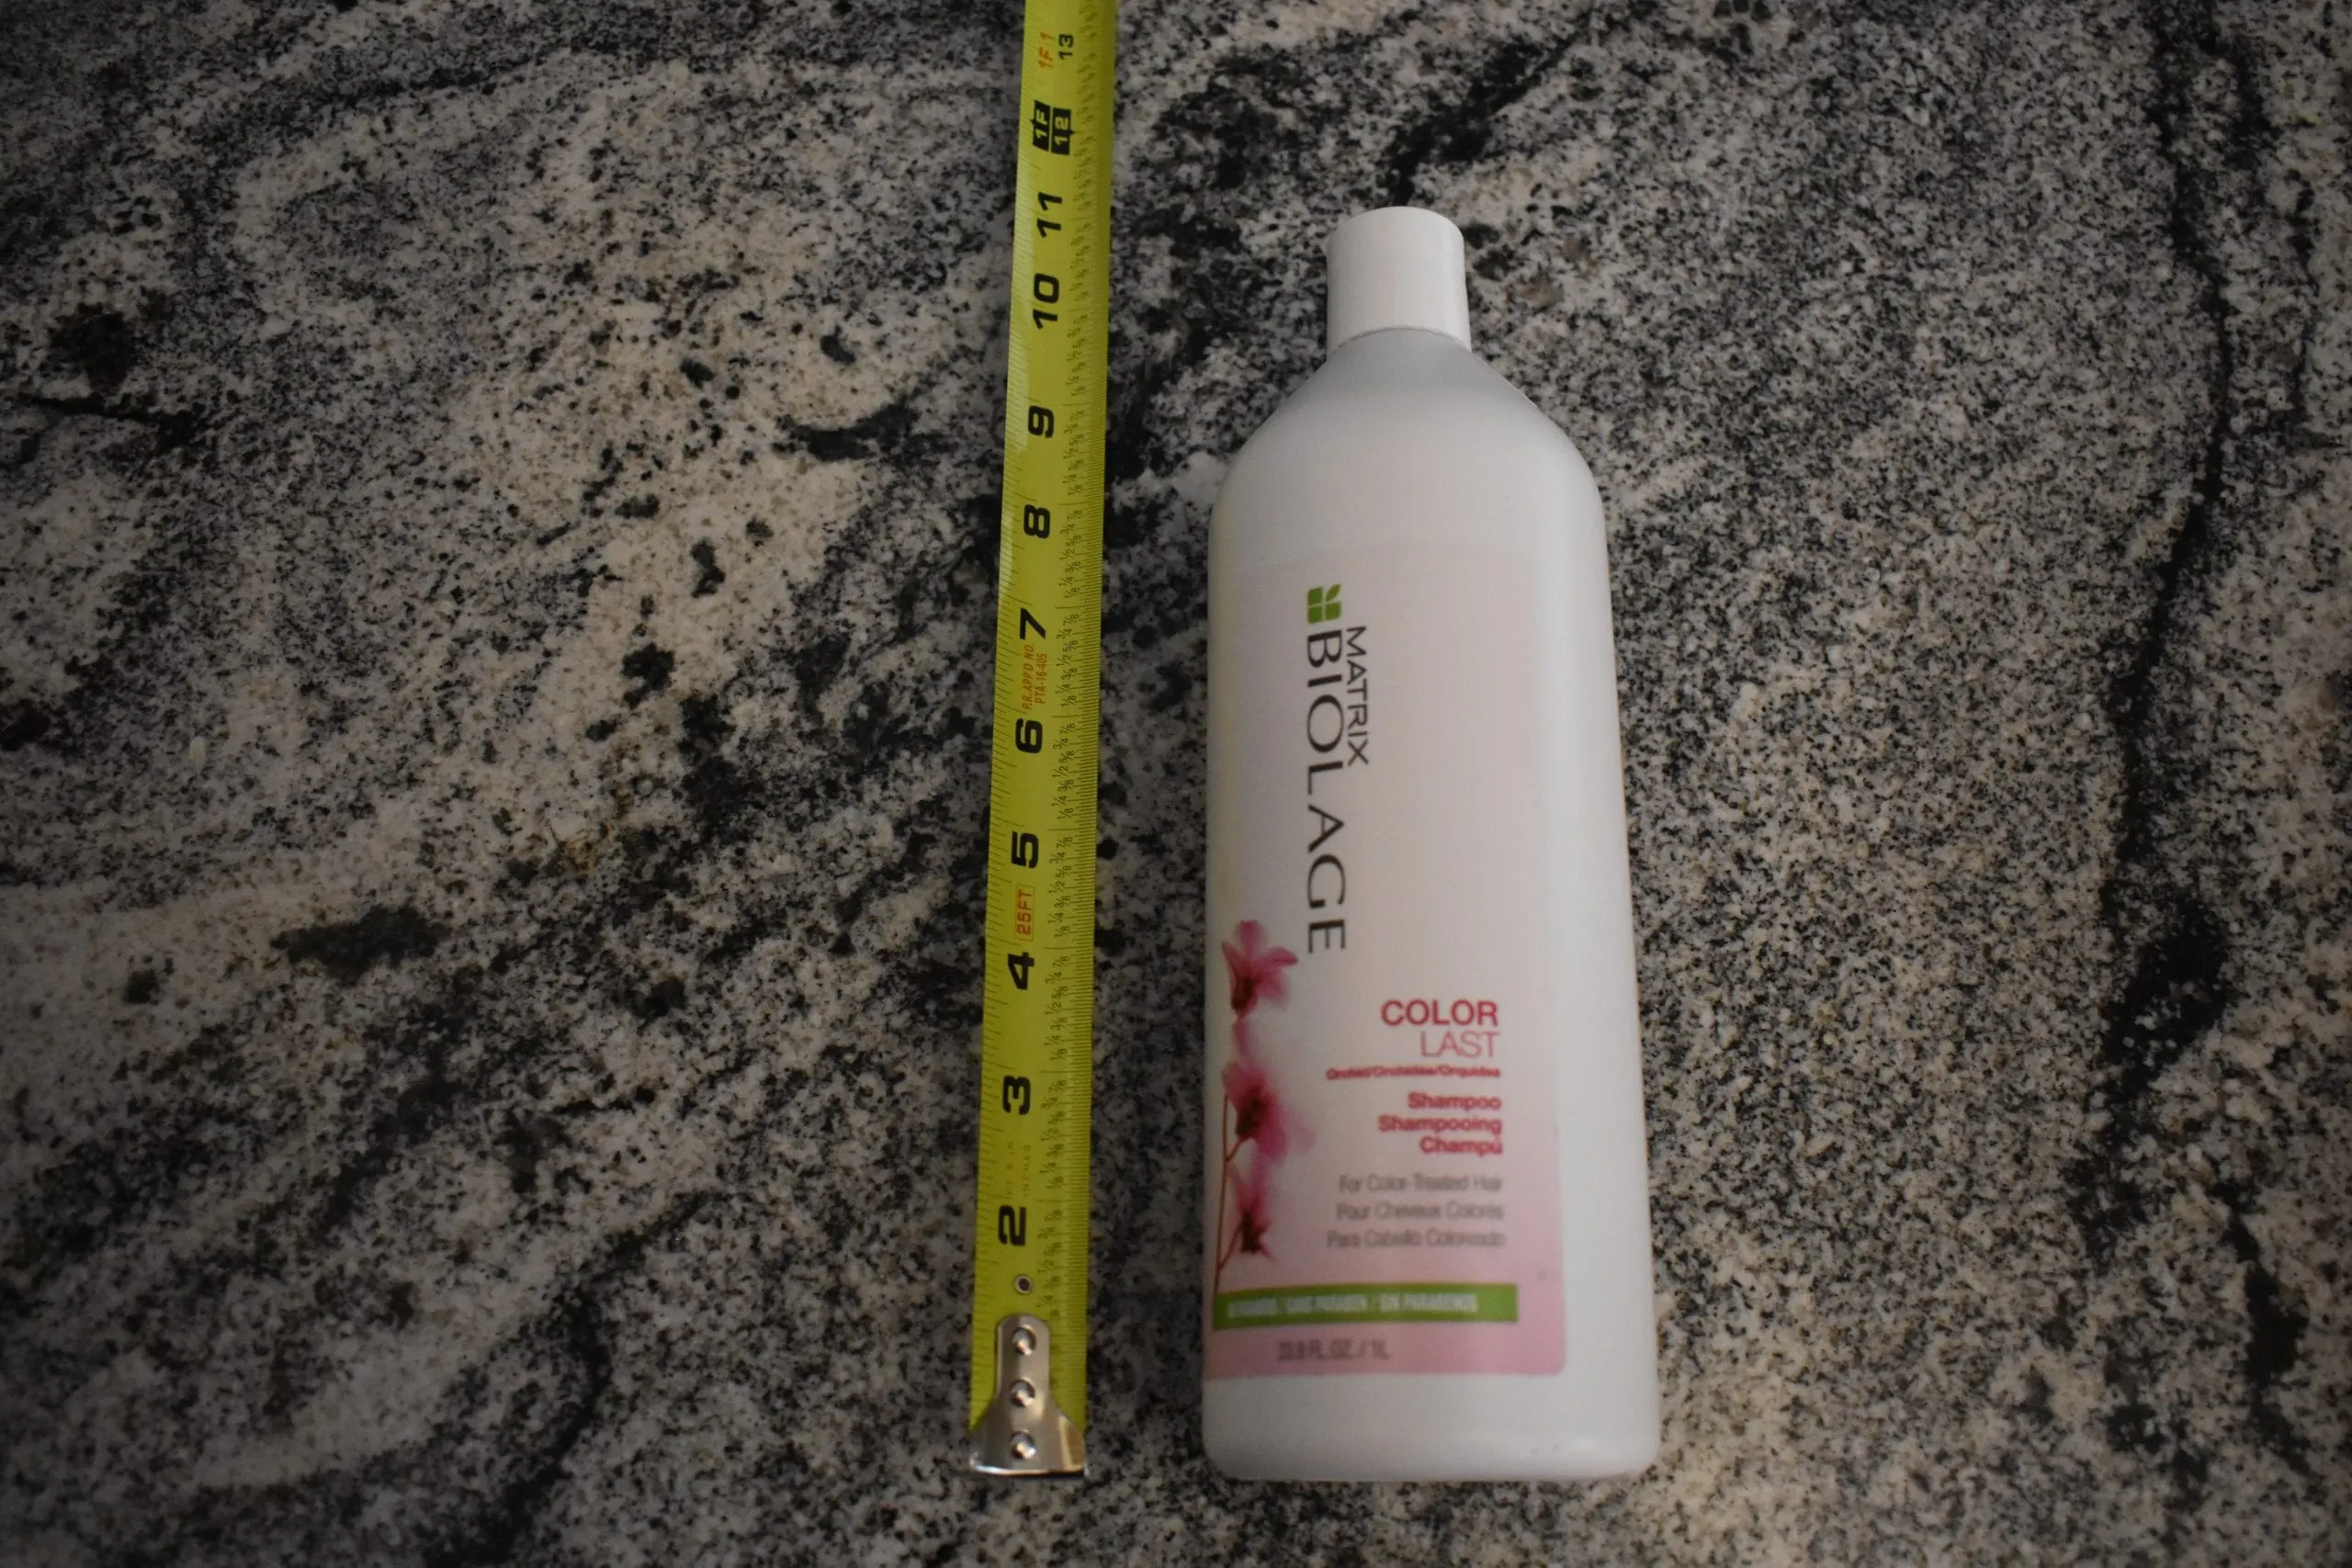 Biolage Colorlast shampoo sitting on a granite counter with a measuring tape next to it